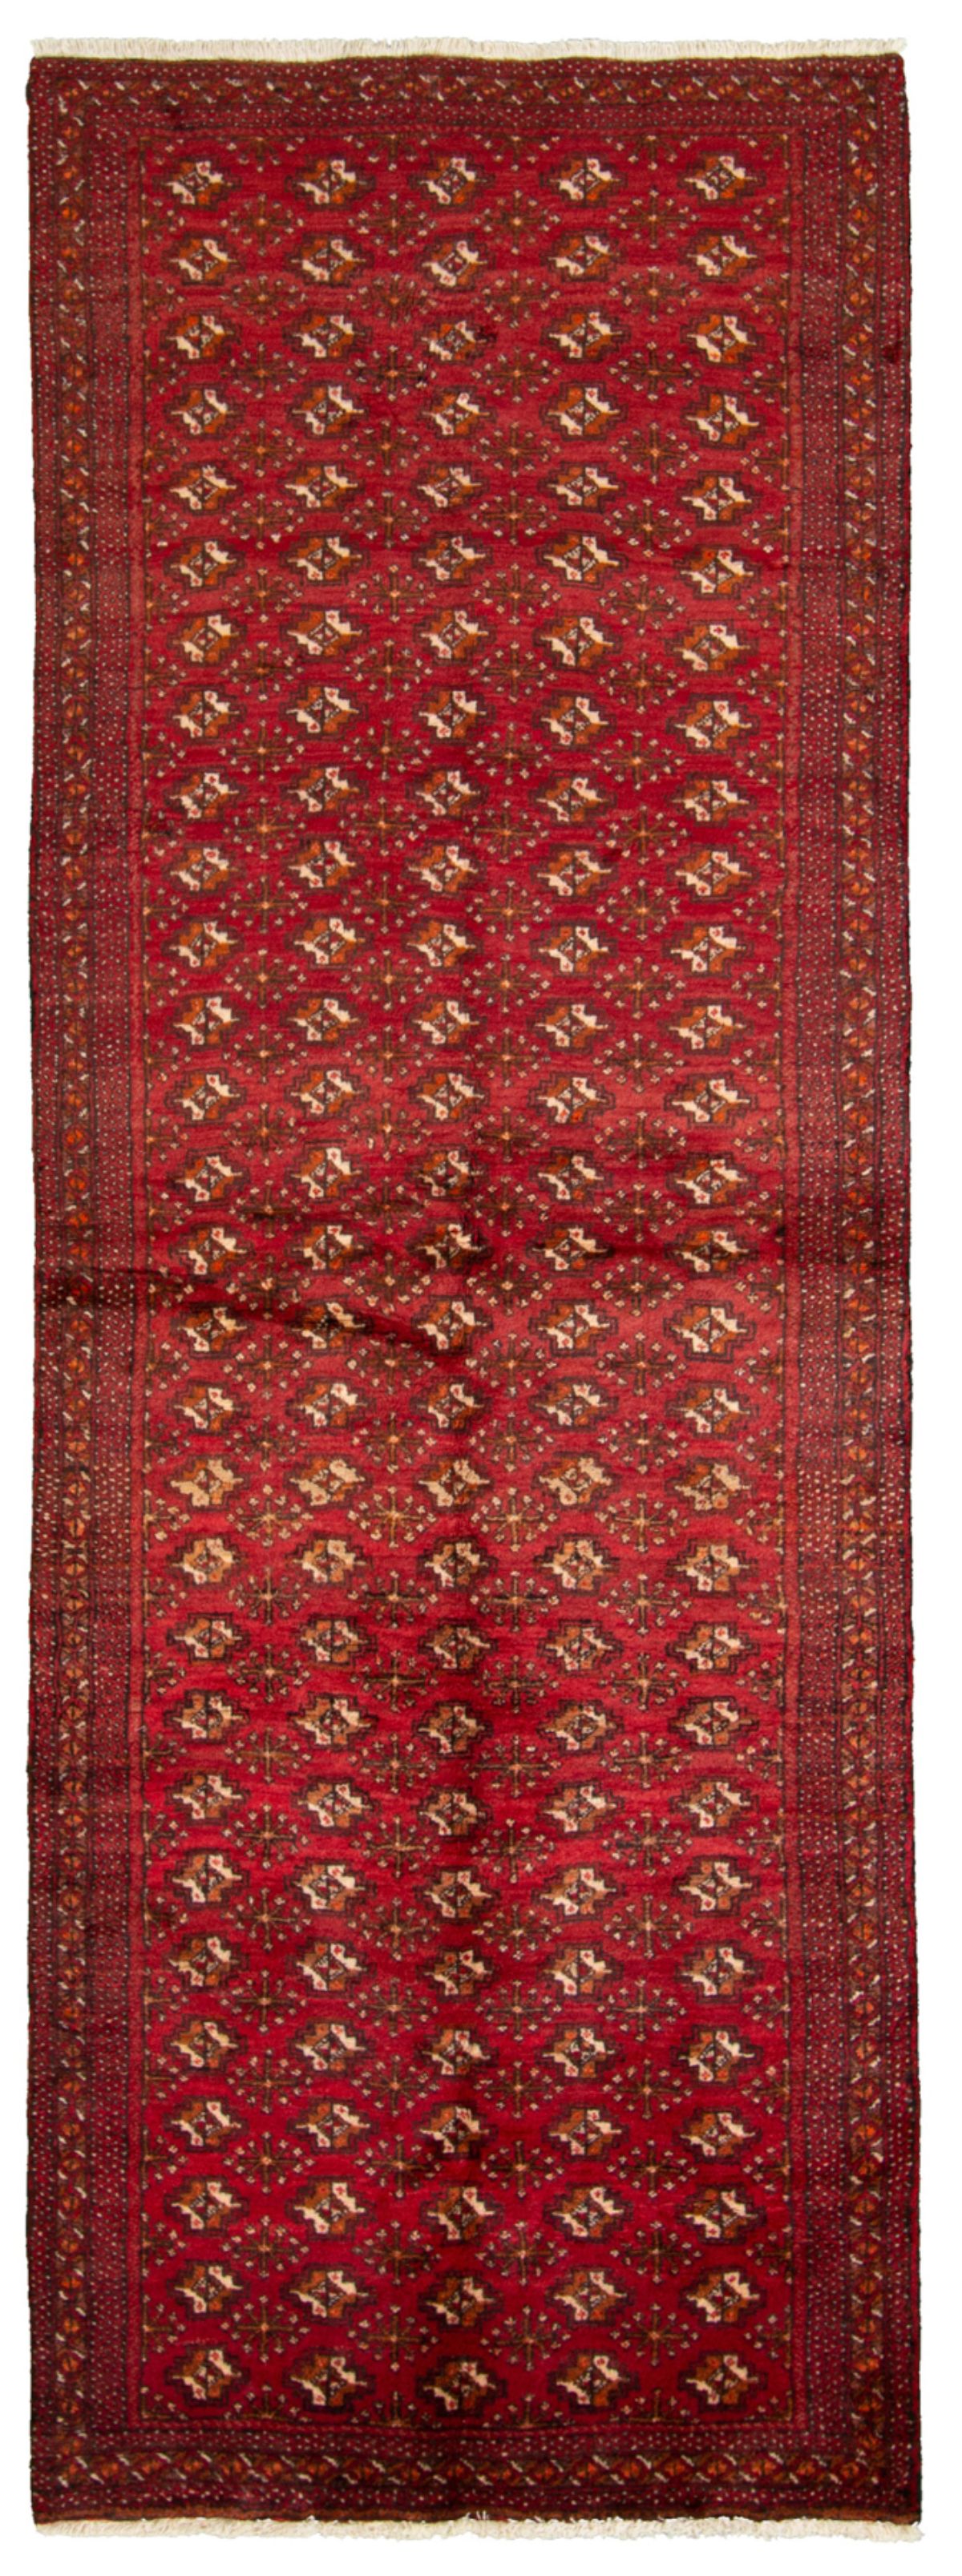 Hand-knotted Finest Baluch Wool Rug 3'3" x 9'4" Size: 3'3" x 9'4"  